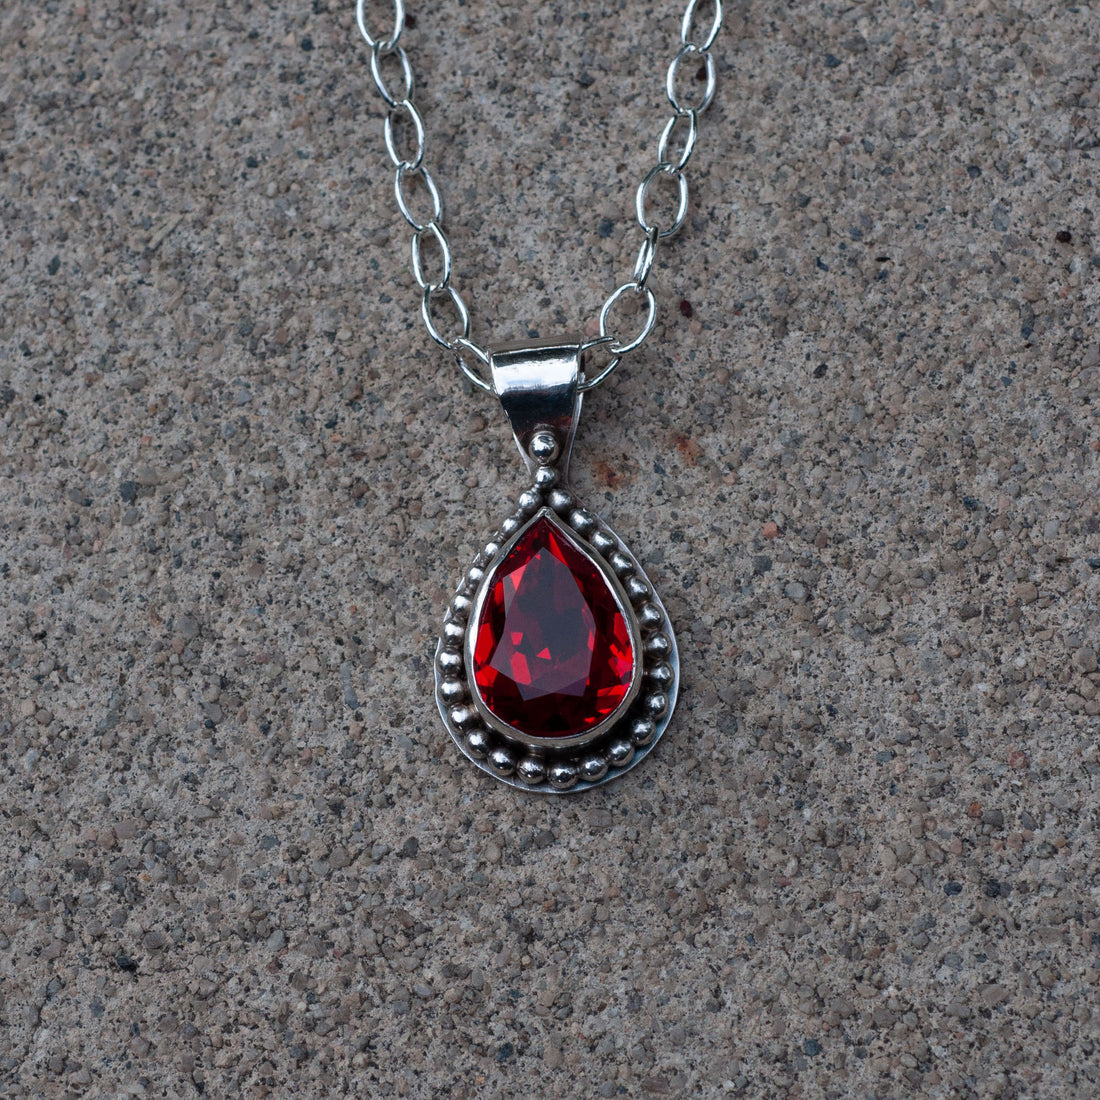 Isabelle's ruby necklace